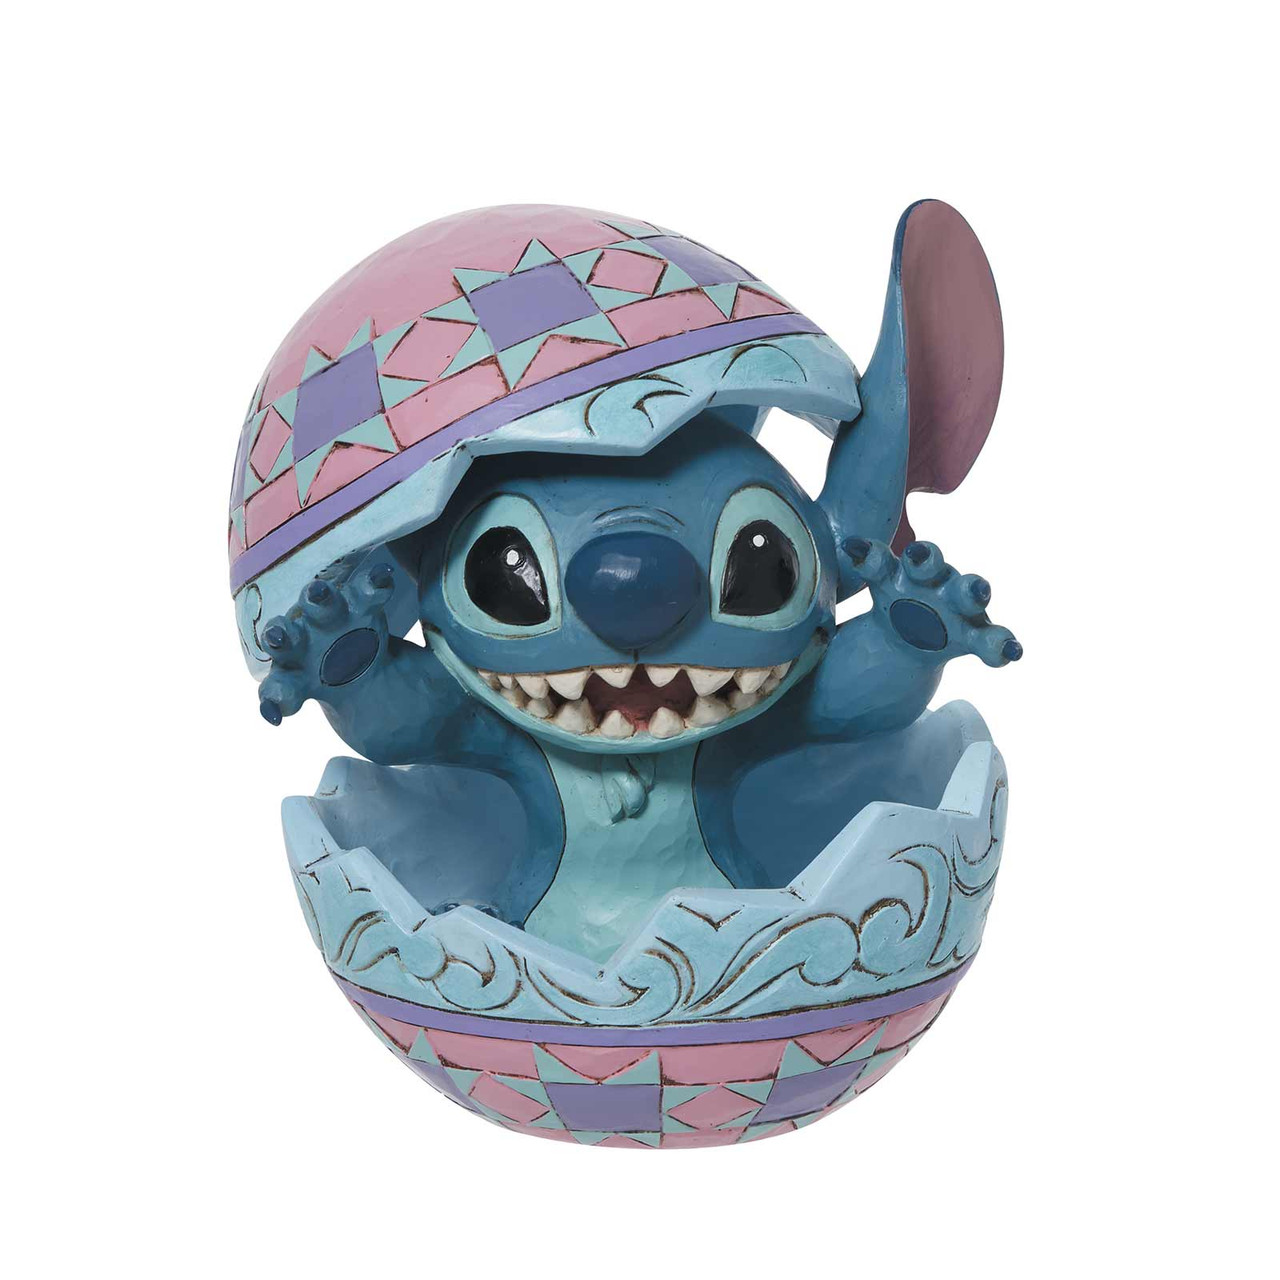 Disney Traditions by Jim Shore - Stitch Statue